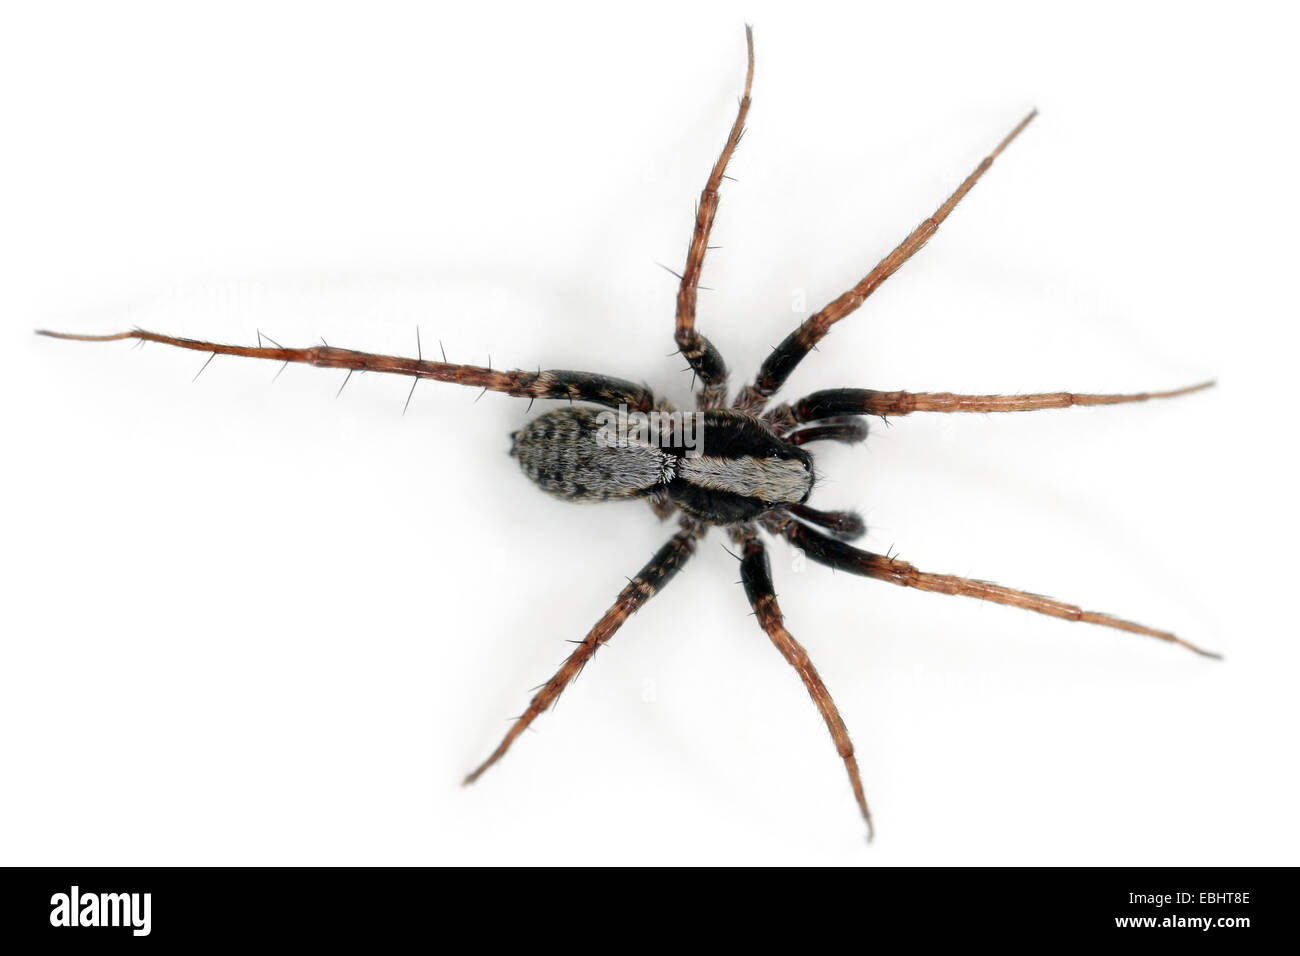 Male Pardosa lugubris spider on white background. Family Lycosidae, Wolf spiders. You can see that this spider has a leg missing. Stock Photo